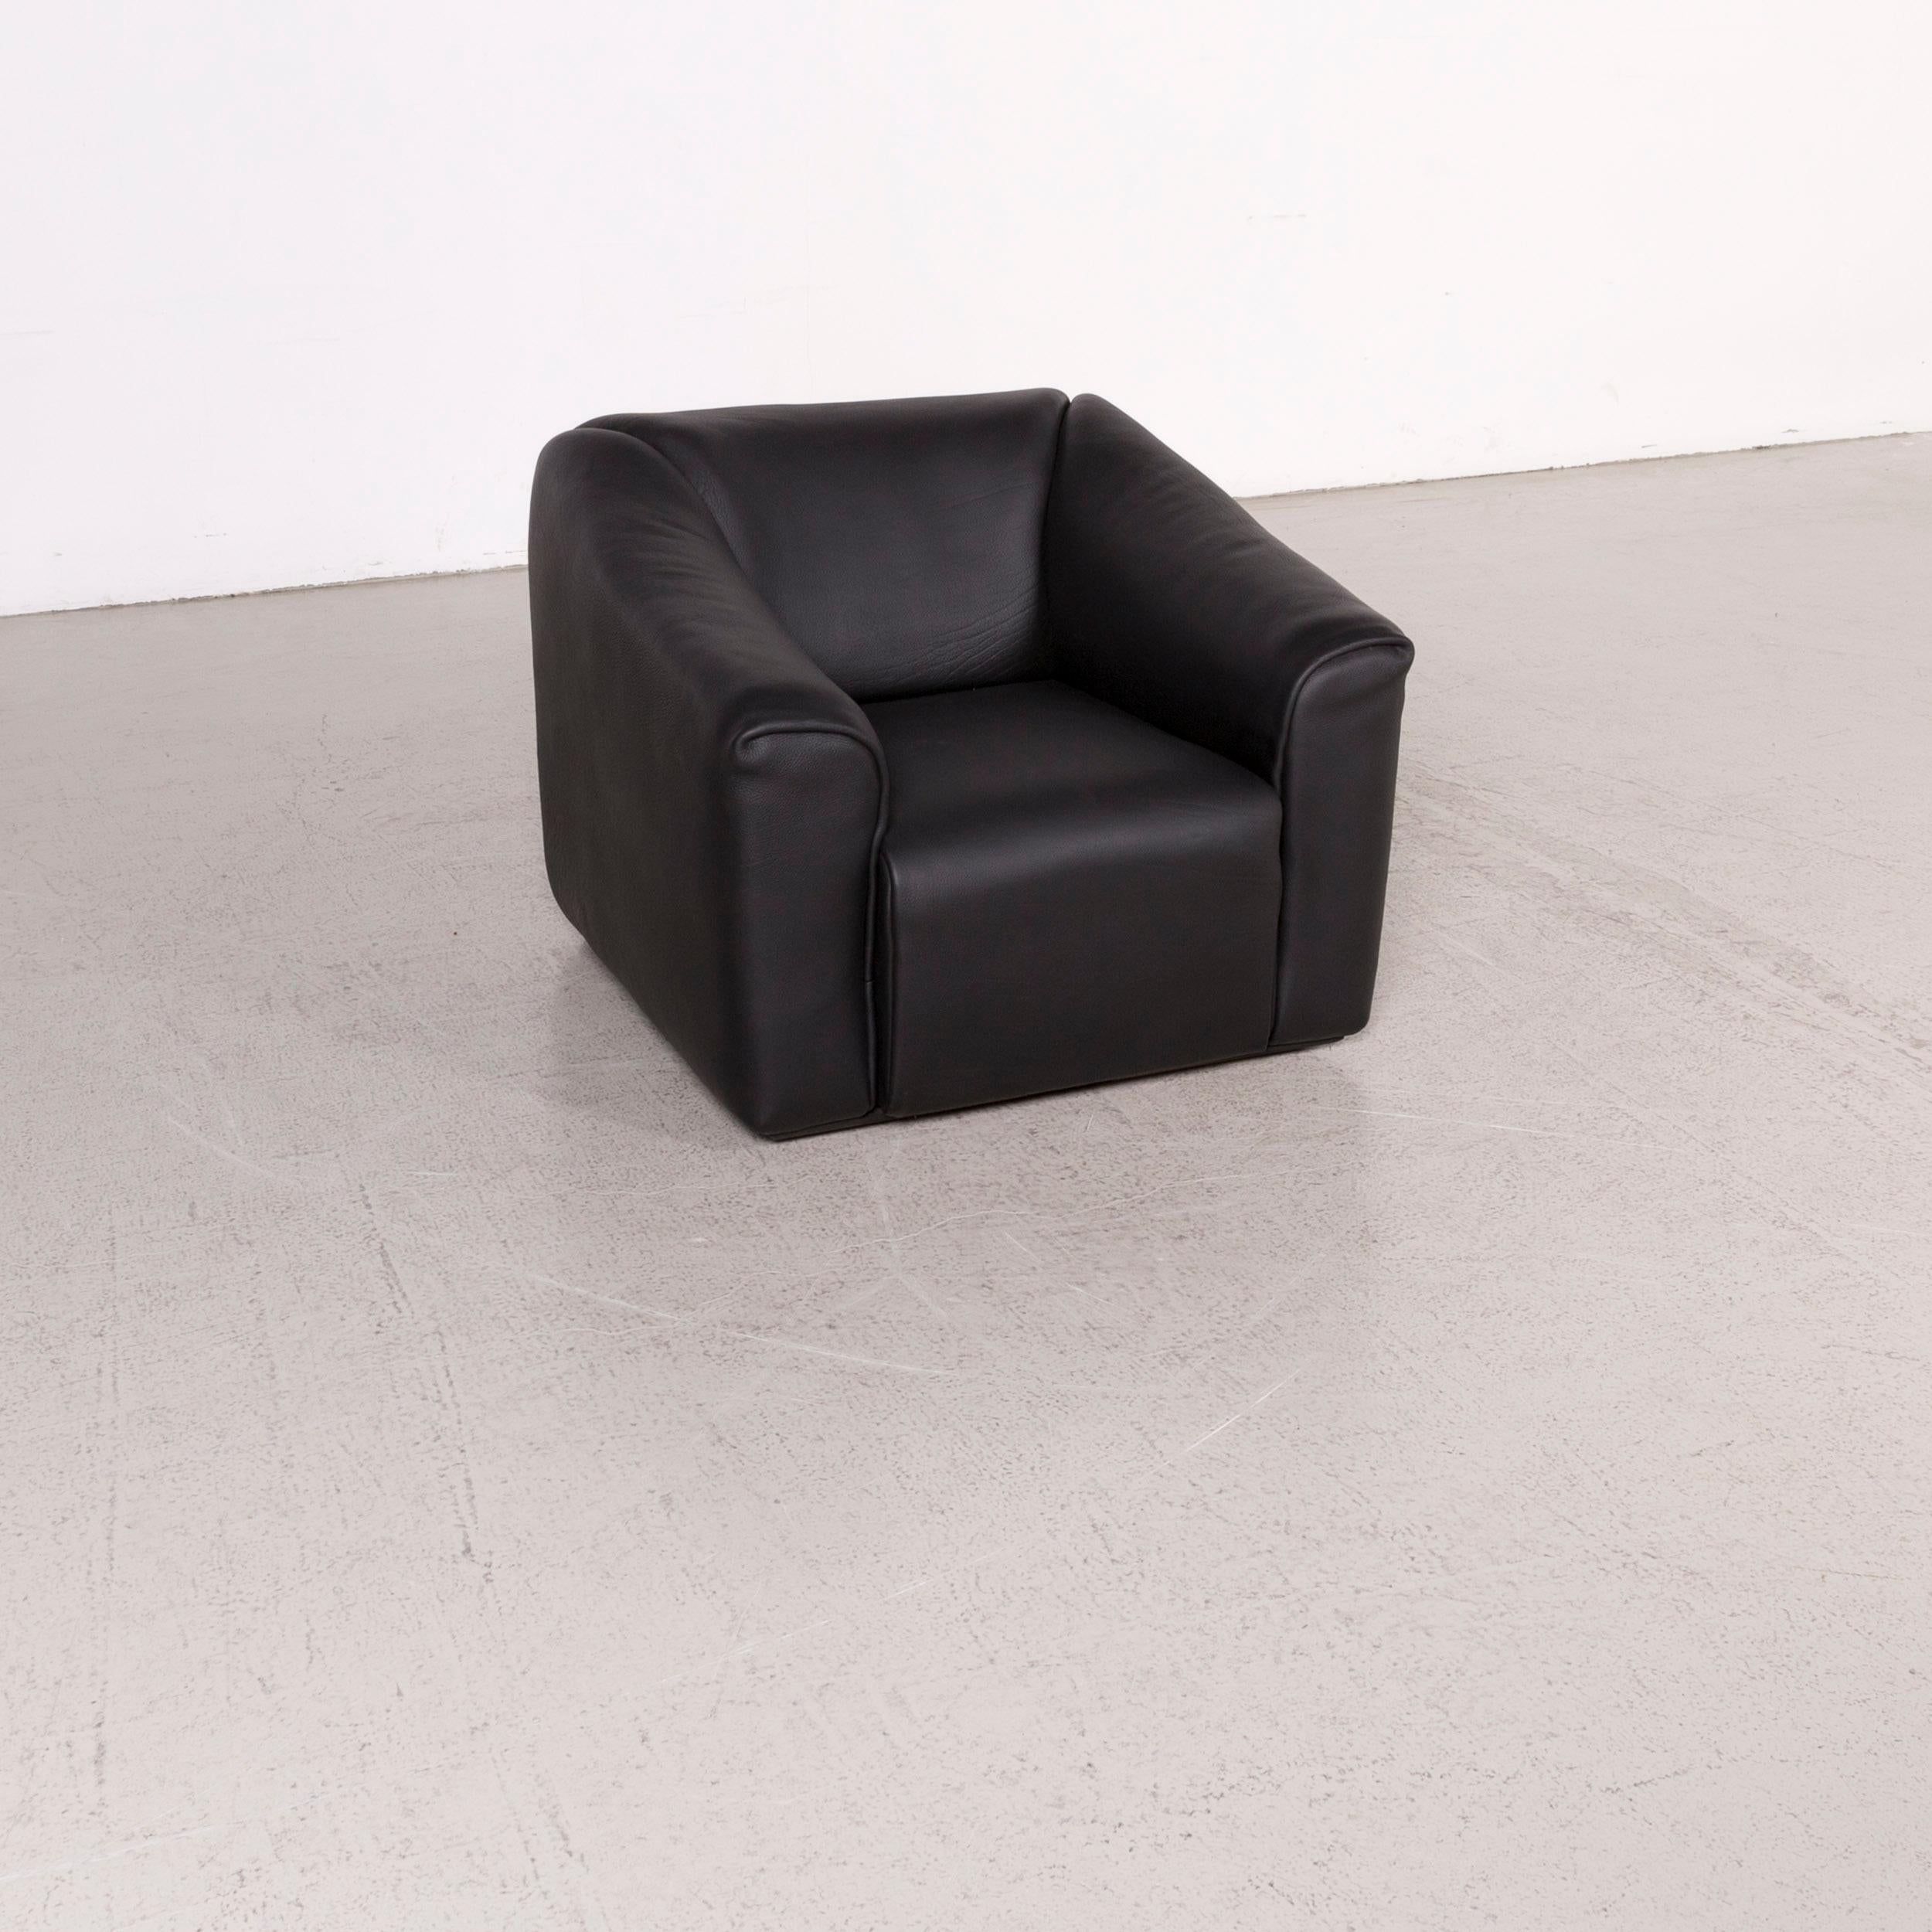 We bring to you a De Sede ds 47 designer leather armchair black genuine leather.

Product measurements in centimeters:

Depth 90
Width 85
Height 70
Seat-height 40
Rest-height 60
Seat-depth 50
Seat-width 45
Back-height 40.
 